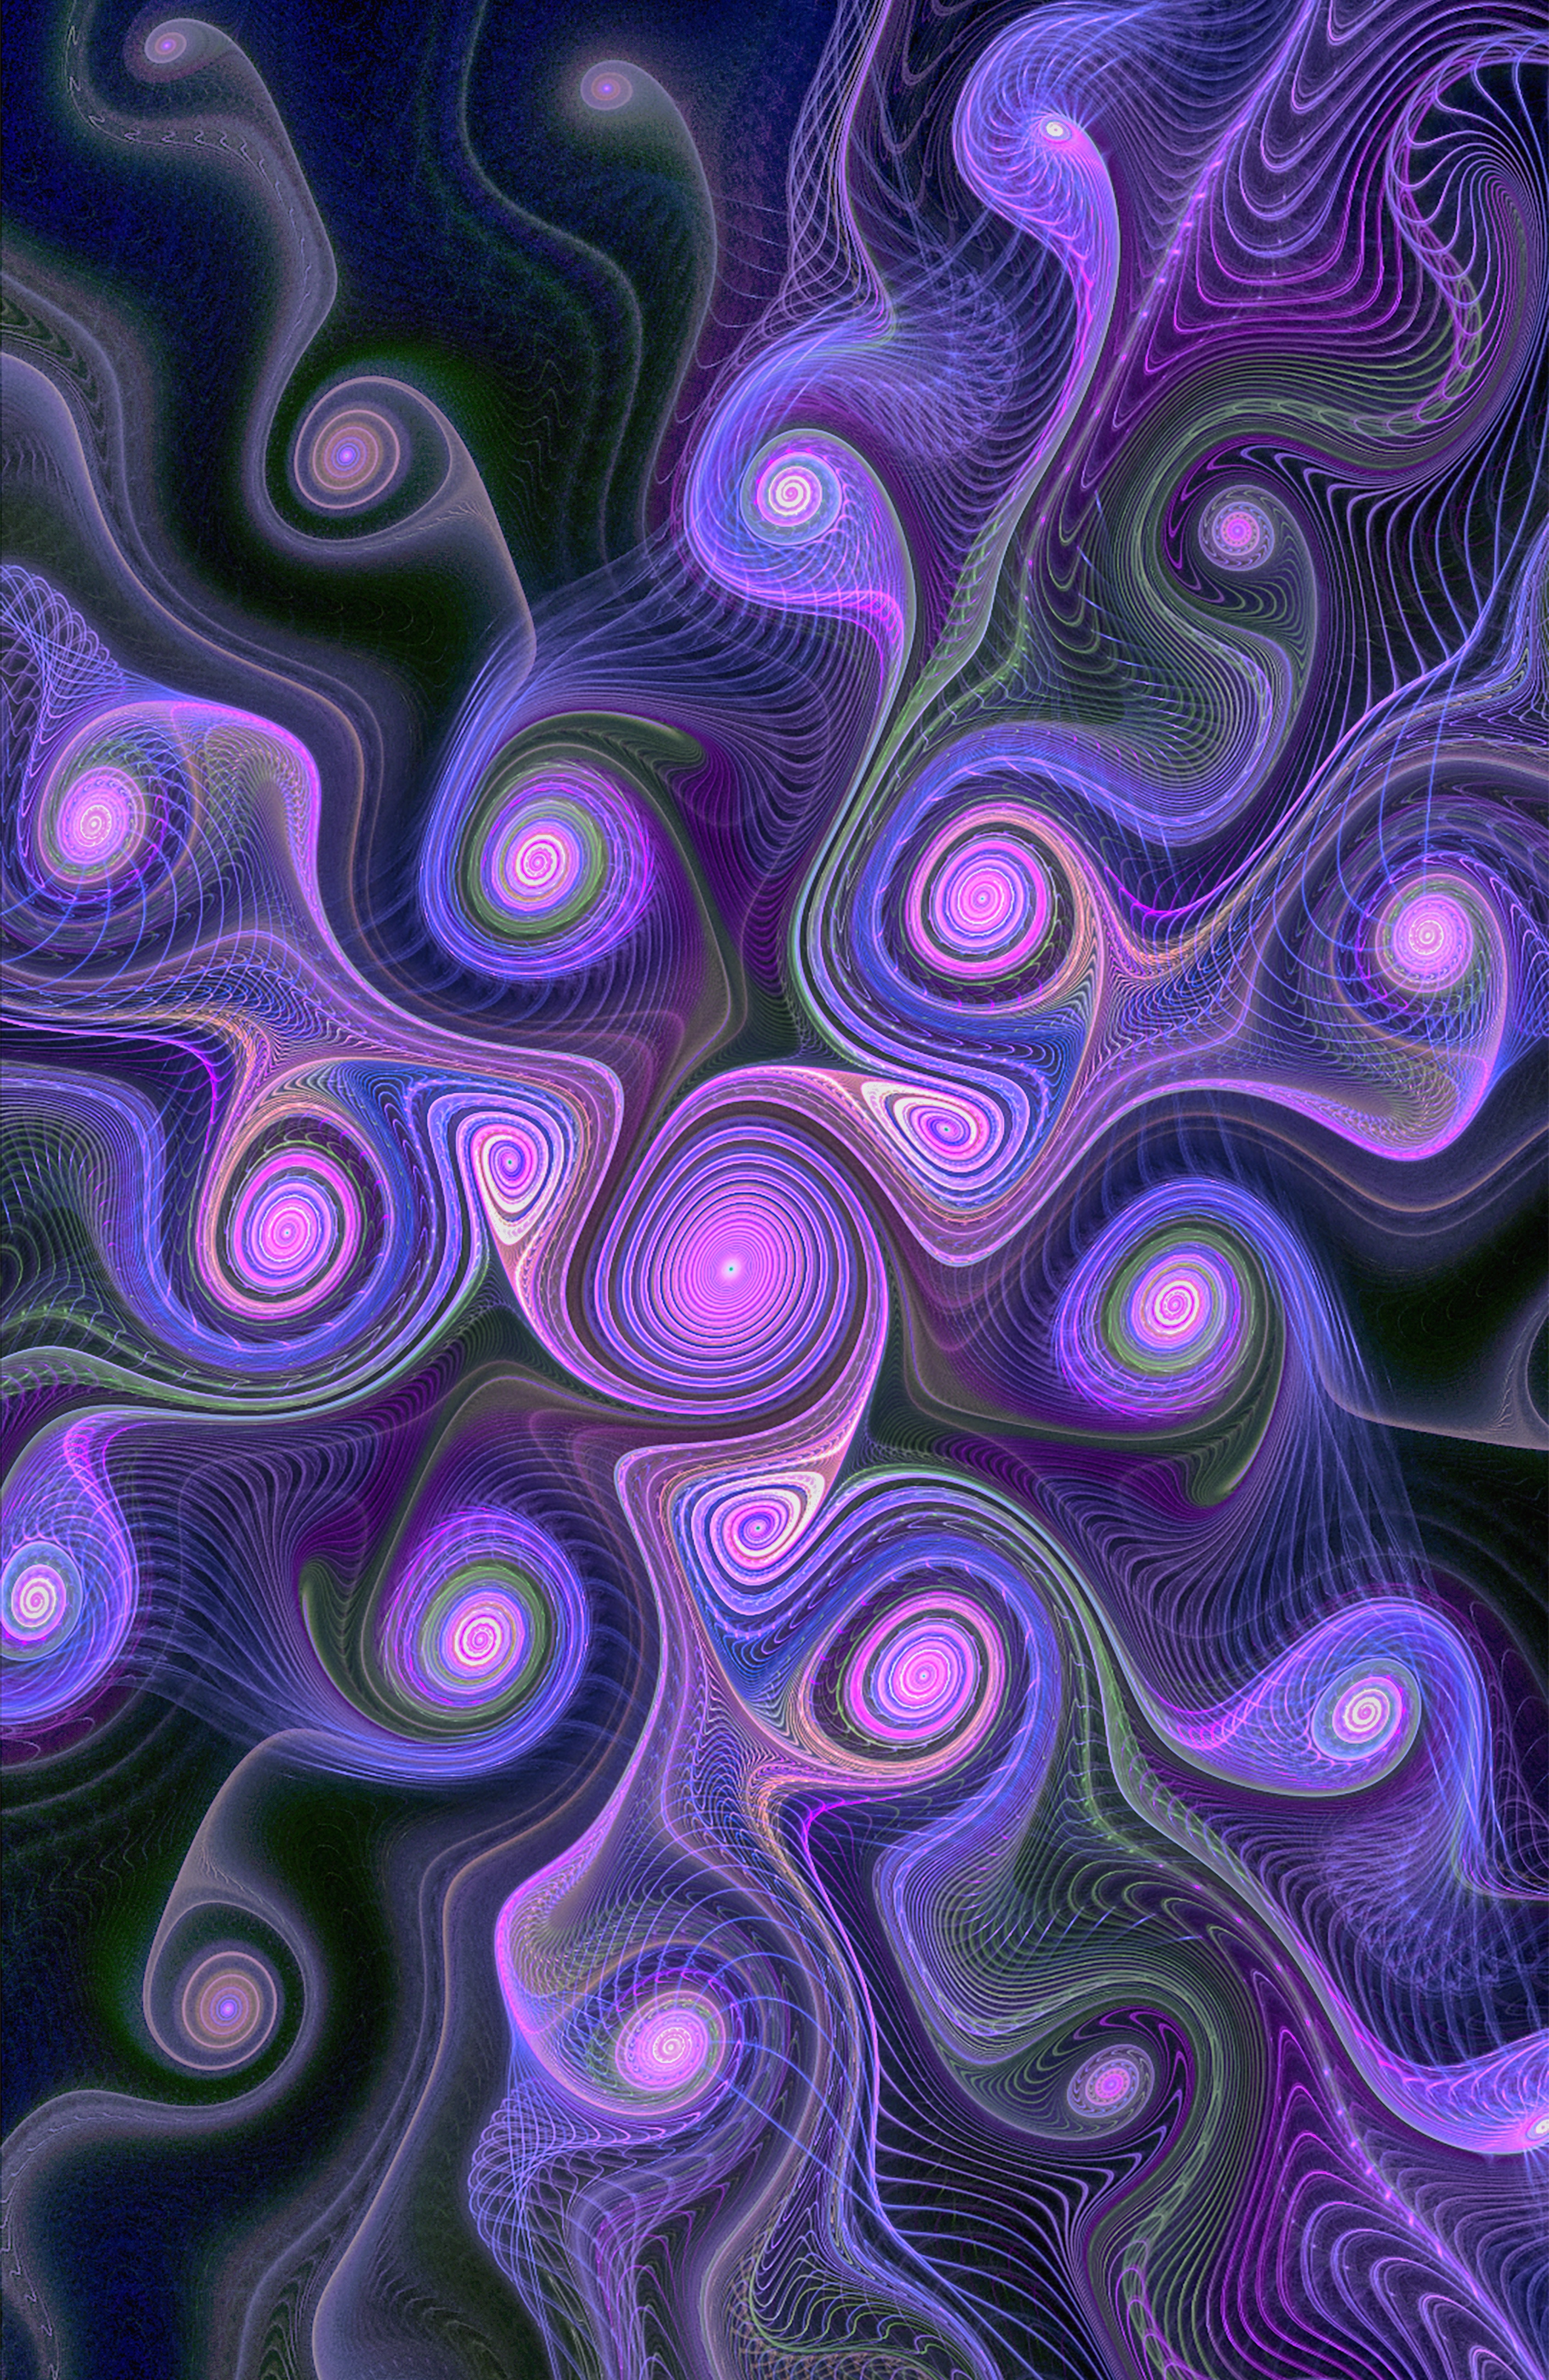 swirling, involute, rotation, abstract, circles, fractal, curls